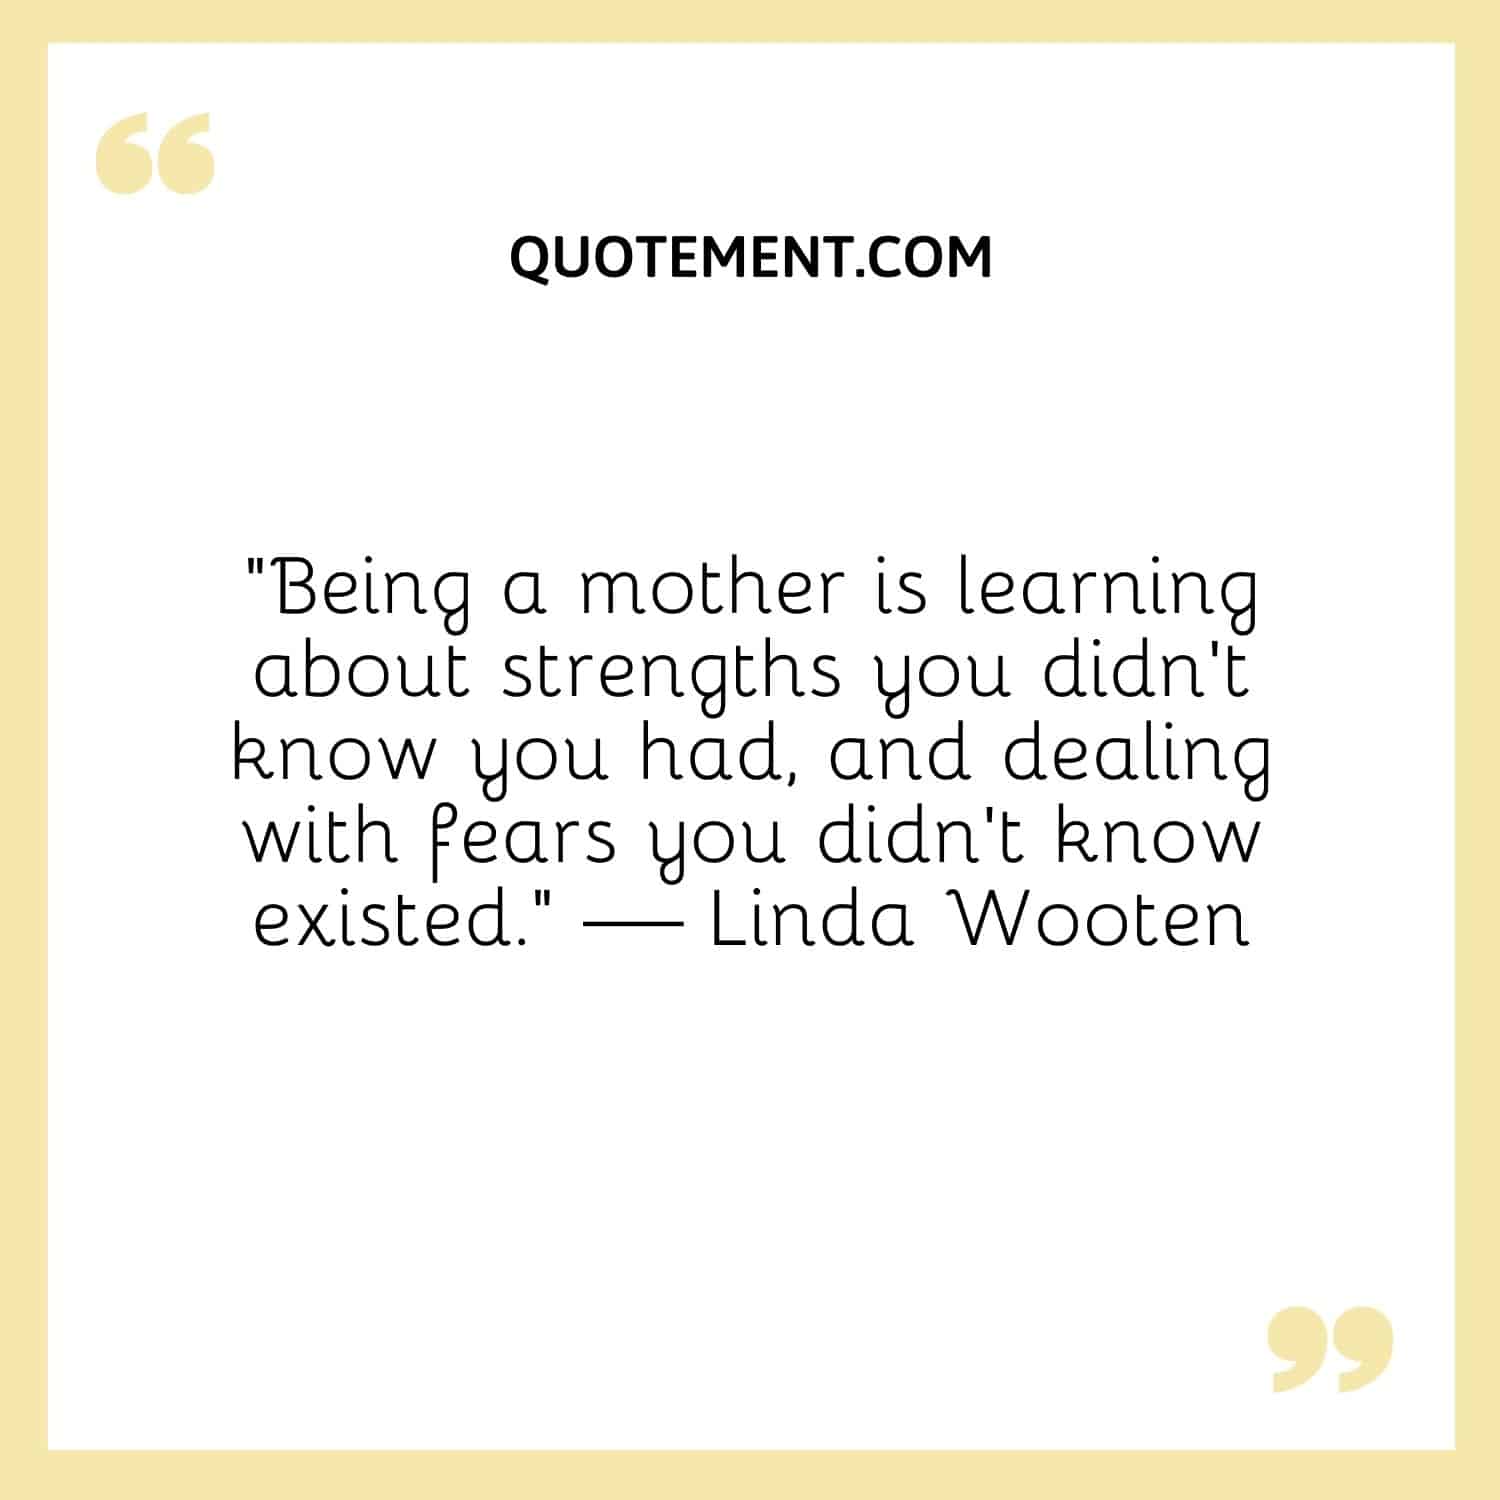 “Being a mother is learning about strengths you didn’t know you had, and dealing with fears you didn’t know existed.” — Linda Wooten